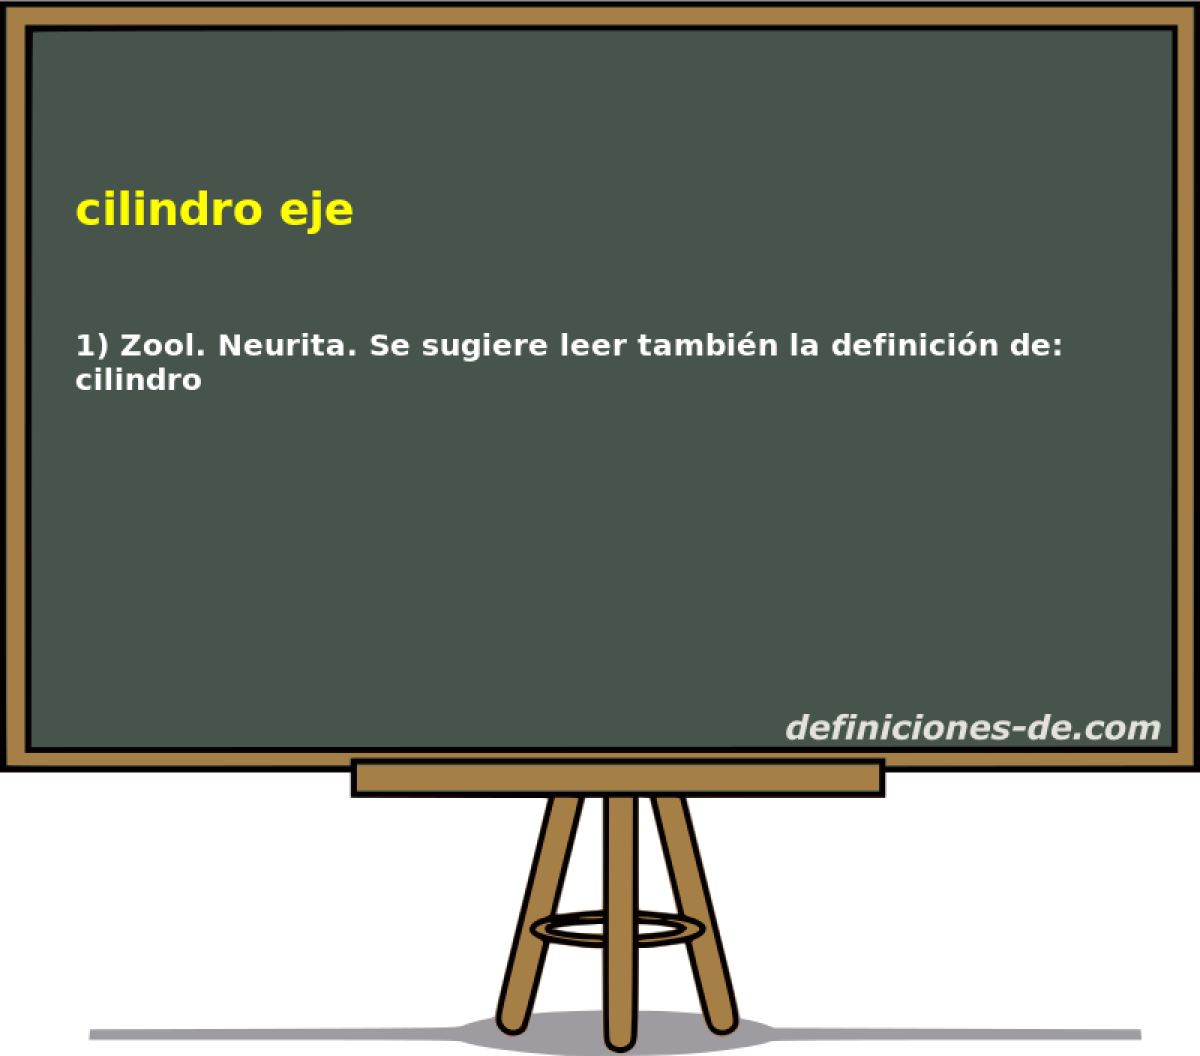 cilindro eje 